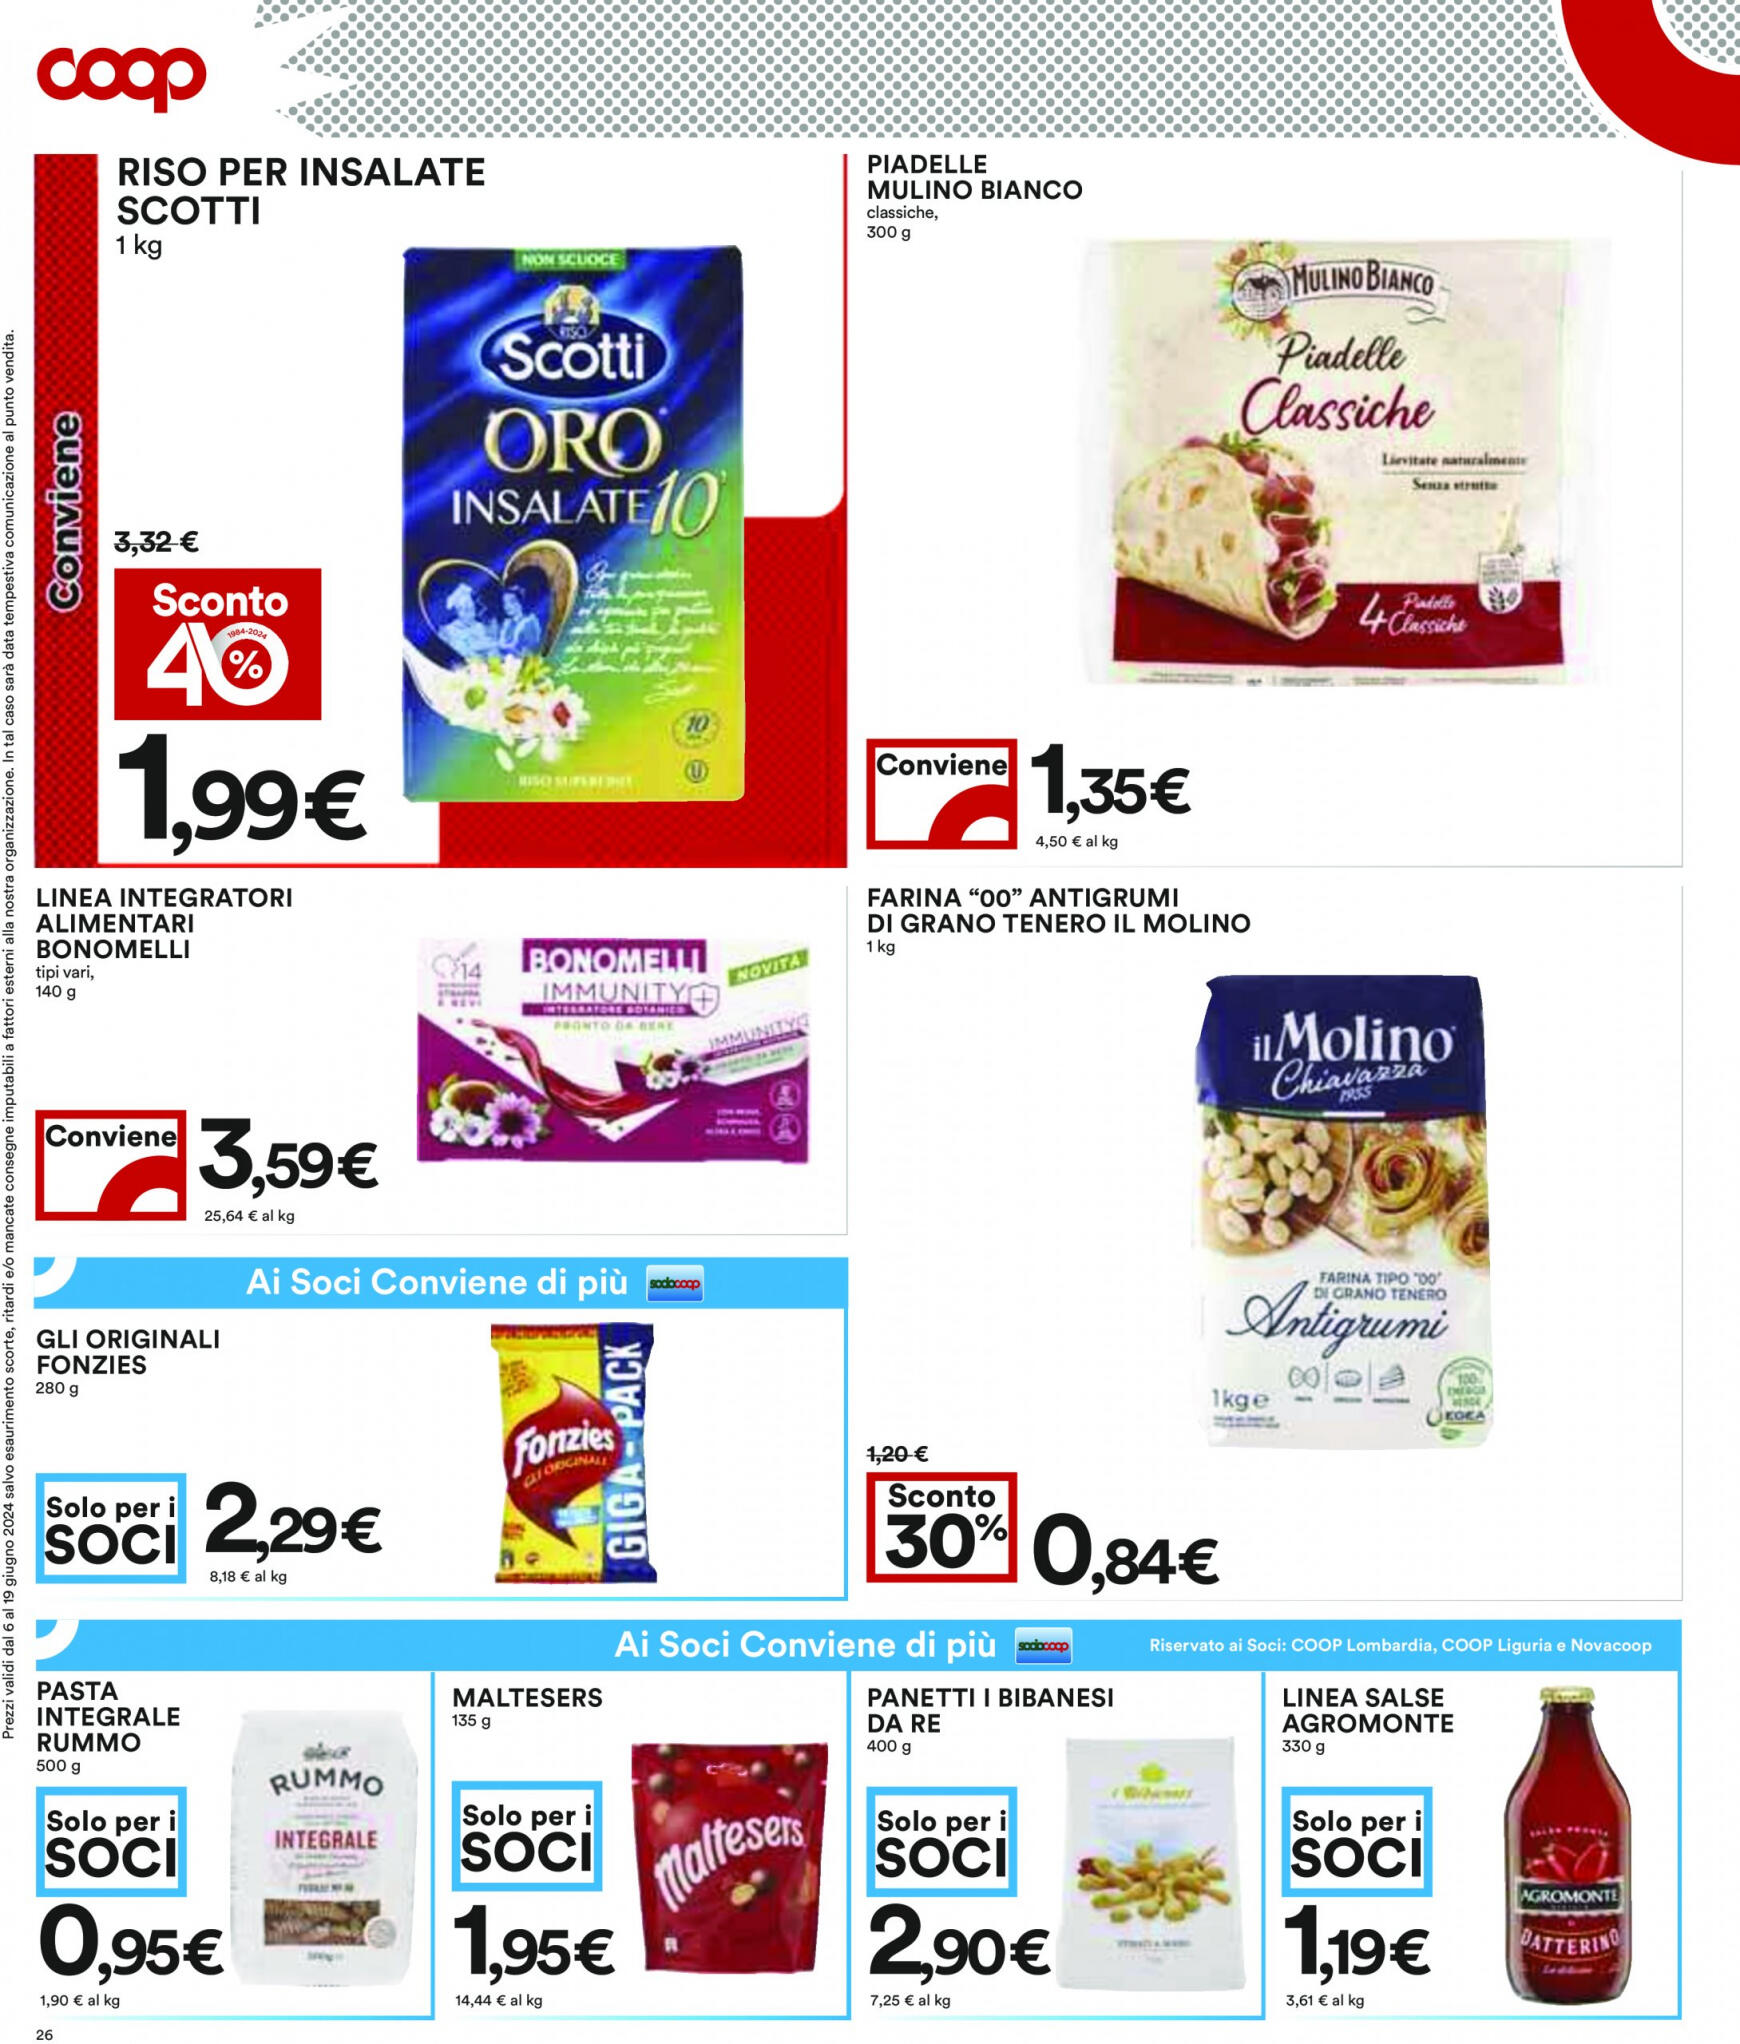 coop - Nuovo volantino Coop 10.06. - 19.06. - page: 26